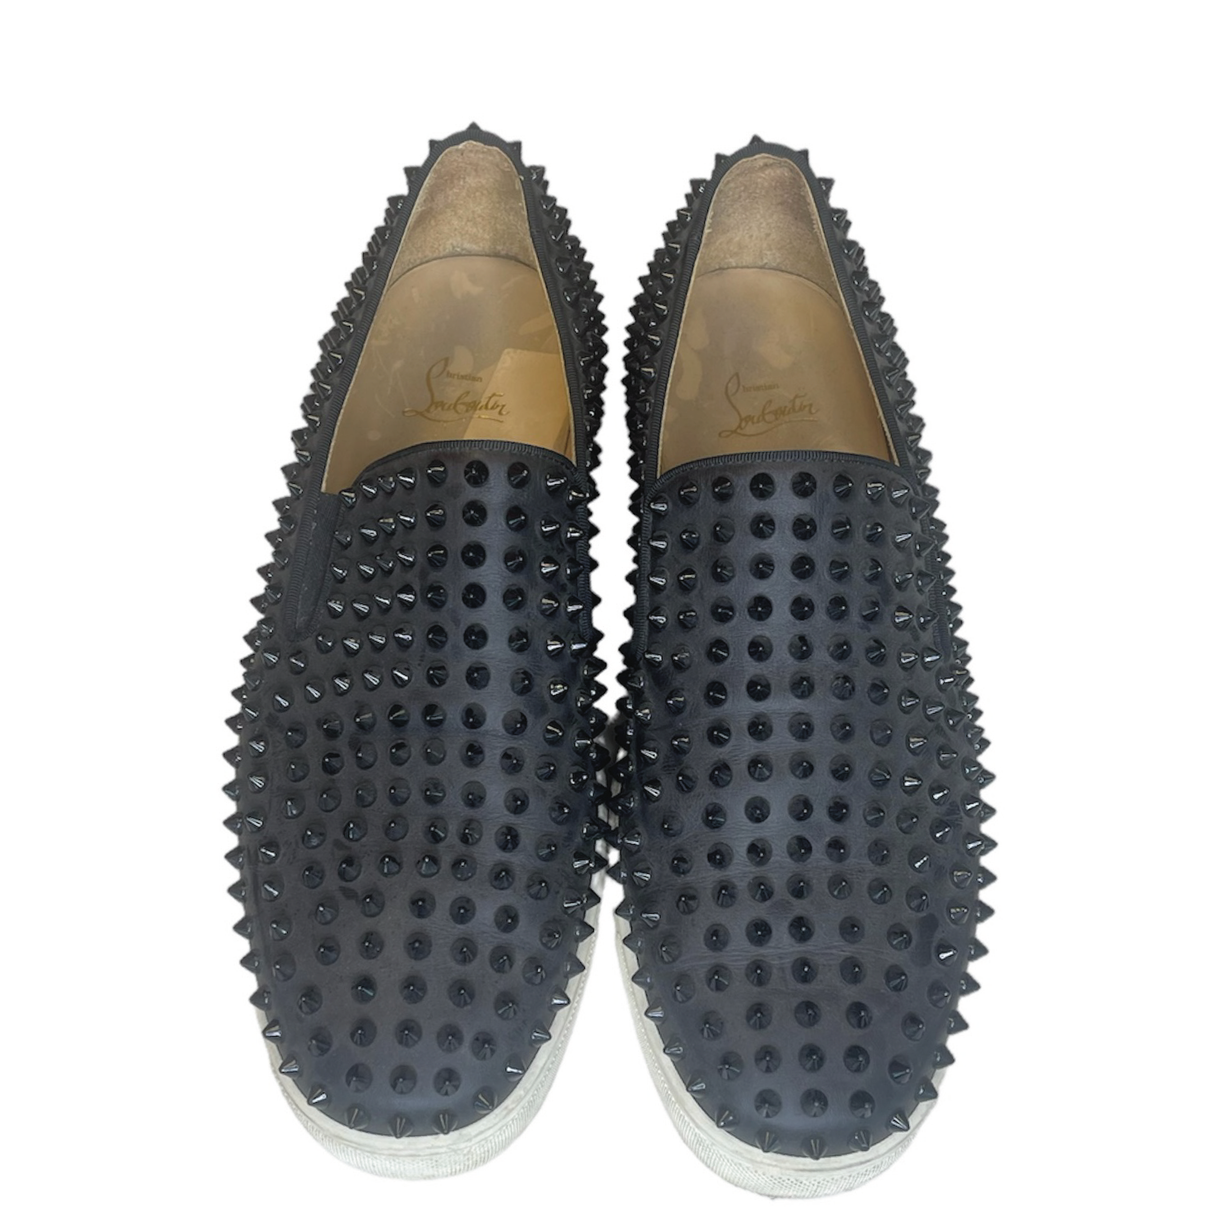 A Second chance - Christian Louboutin Shoes 43½ Men - Delivery All Over Lebanon